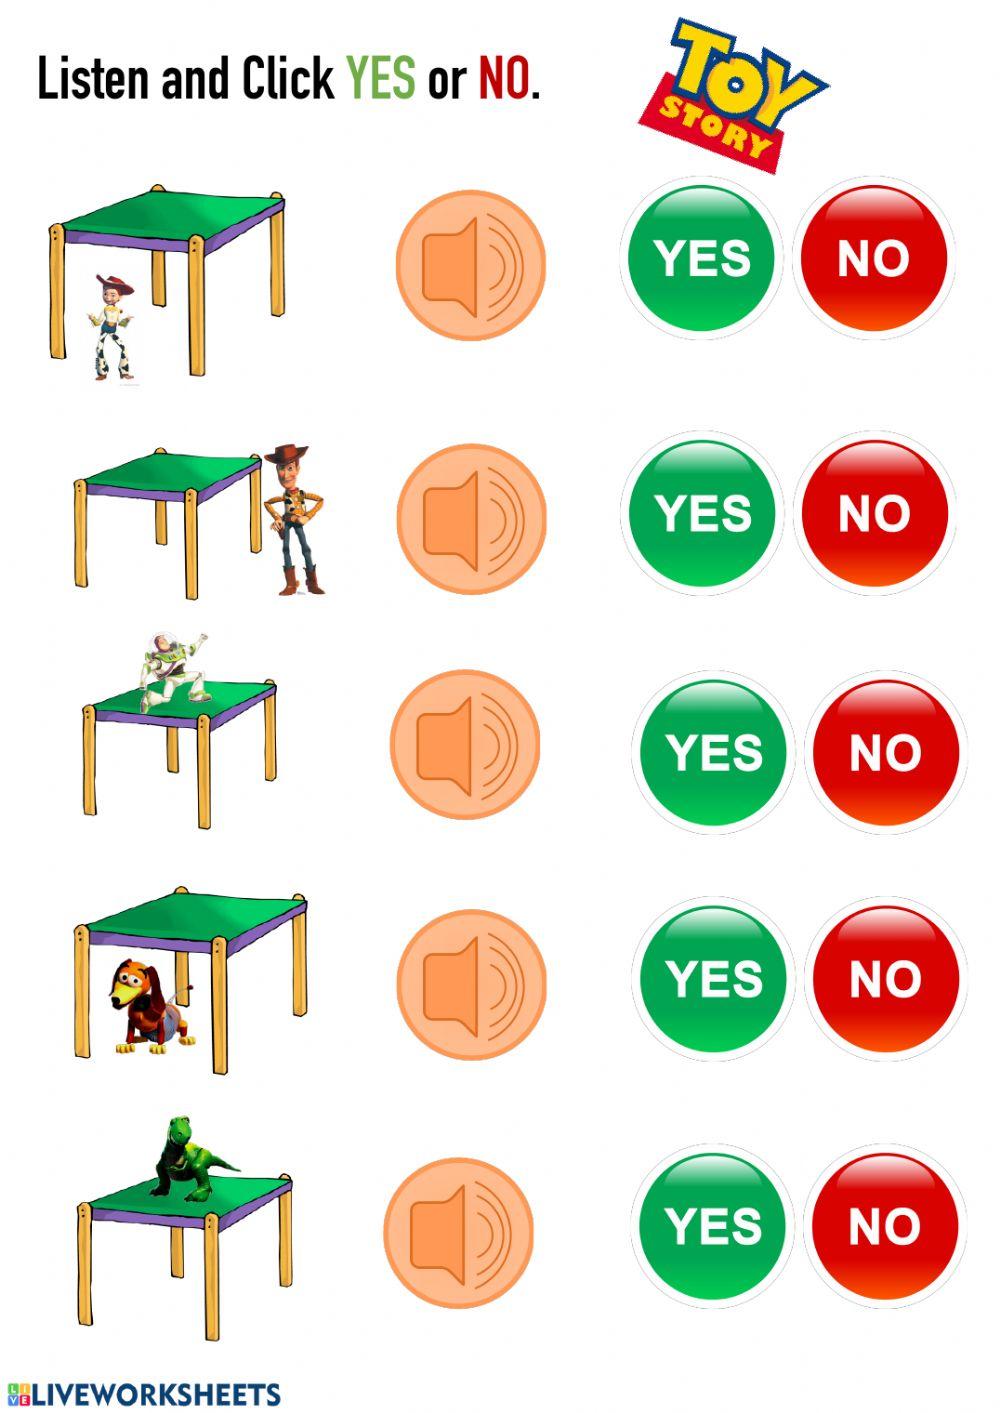 Prepositions - Listen and click yes or no.